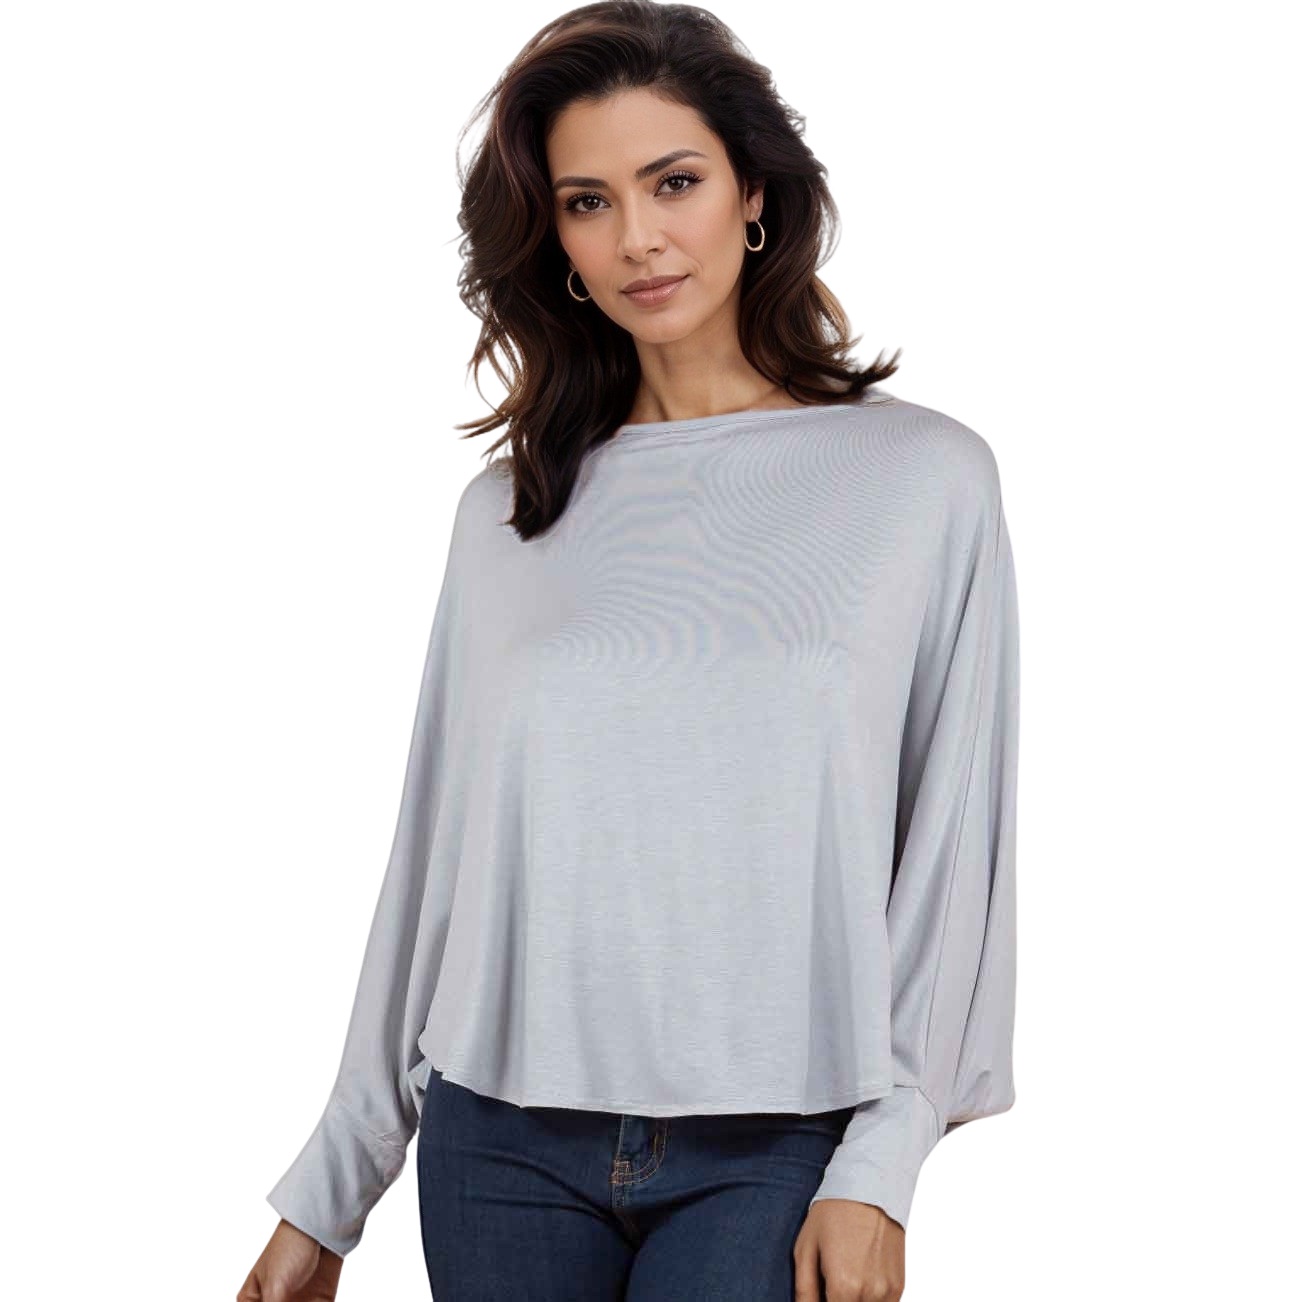 1818 - Silver<br>
Poncho with Sleeves